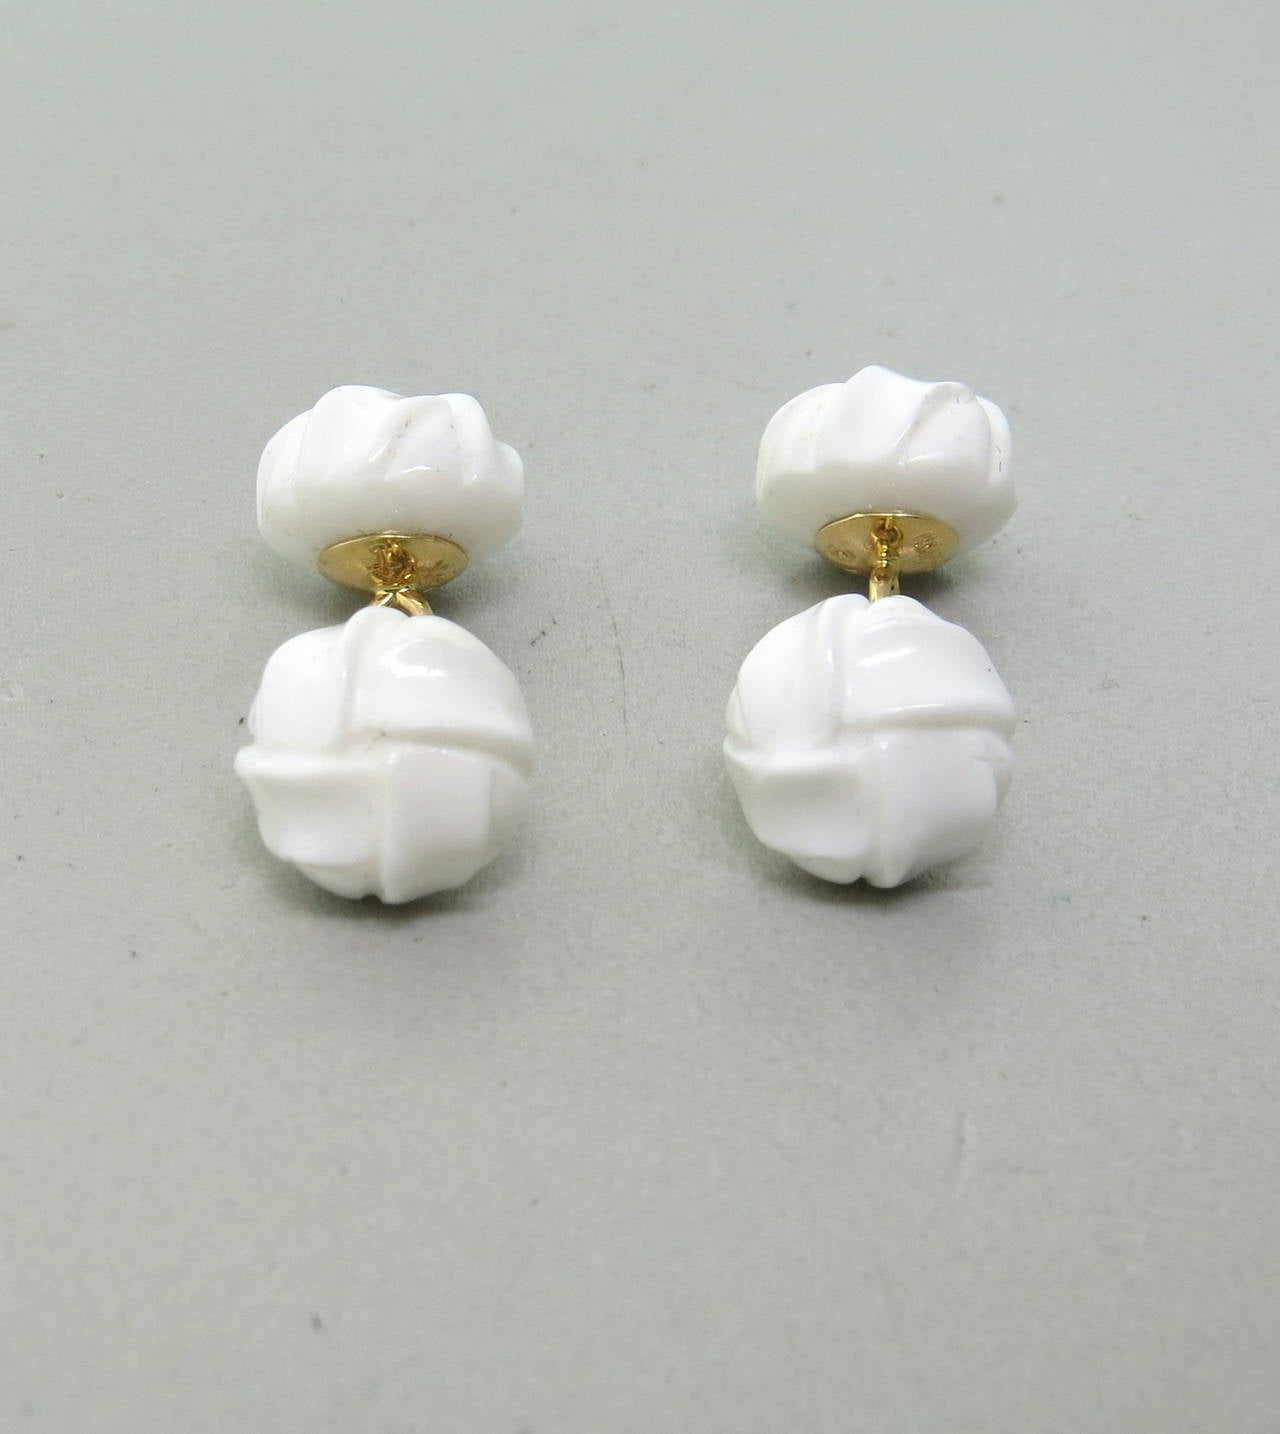 18k gold cufflinks by Trianon with carved white gemstone top - measuring 12mm in diameter.  Weight - 8.6gr.